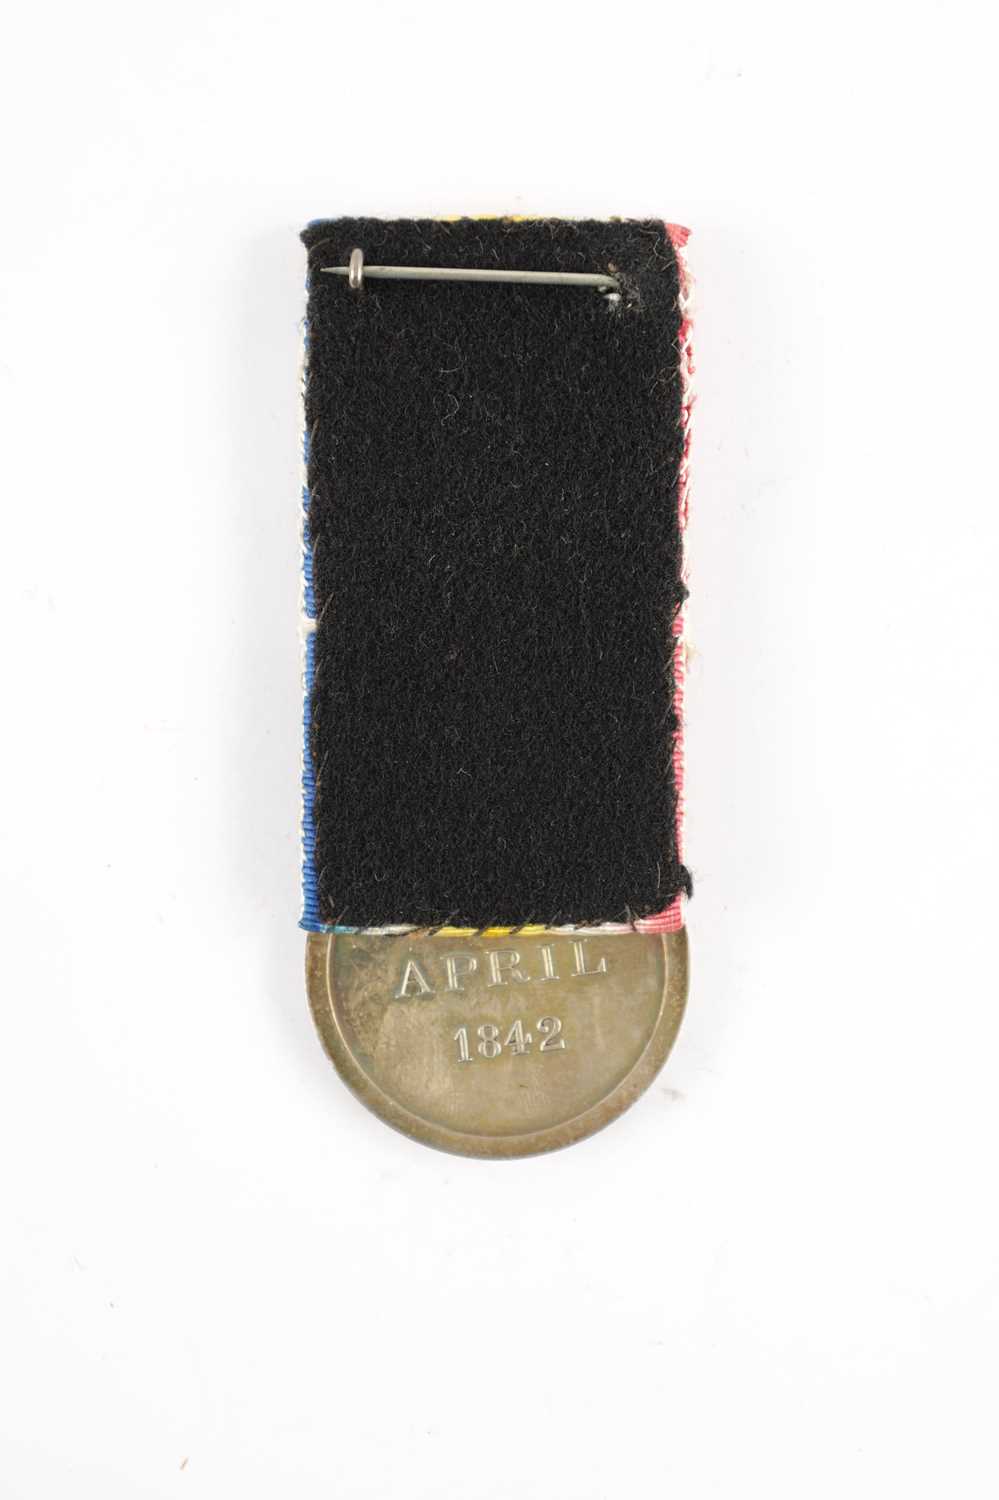 A JELLALABAD MEDAL 1842, 1ST TYPE - Image 4 of 4